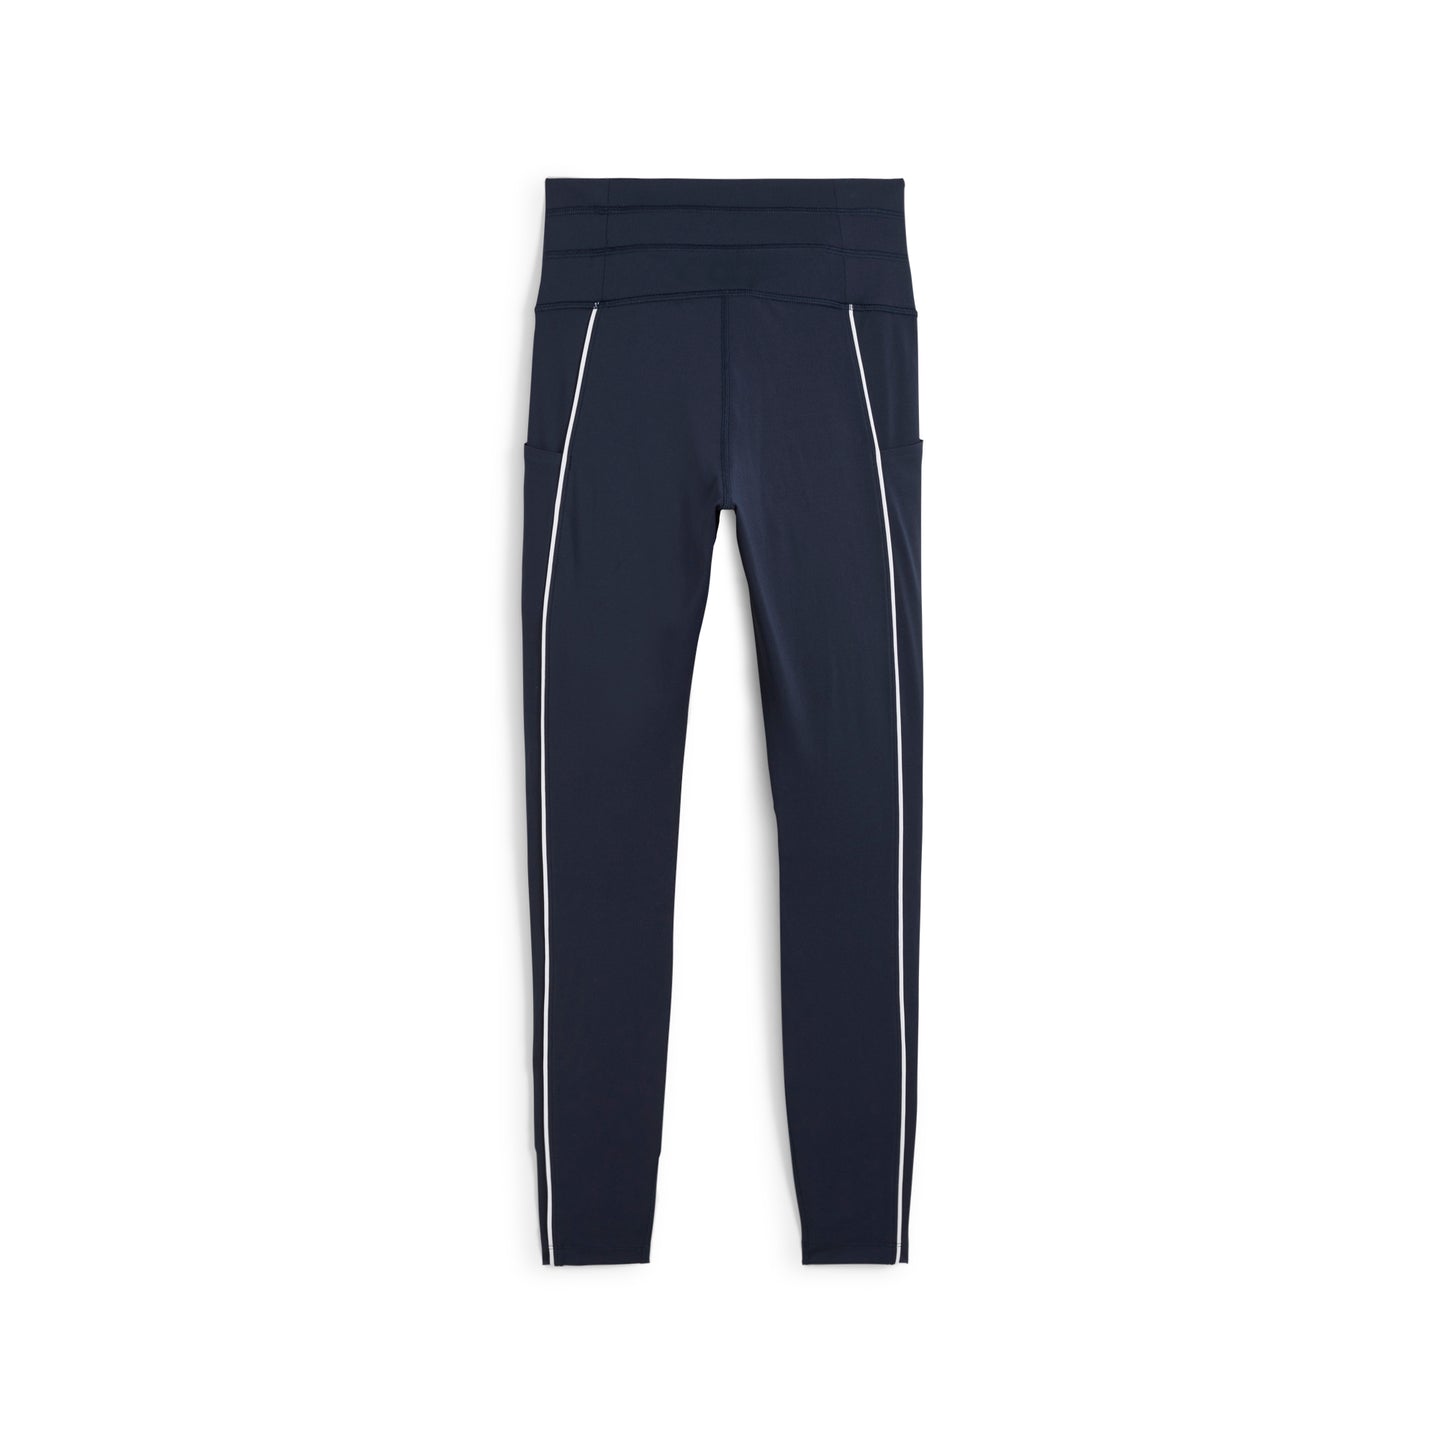 Puma Ladies You-V Leggings in Deep Navy with White Piping Detail